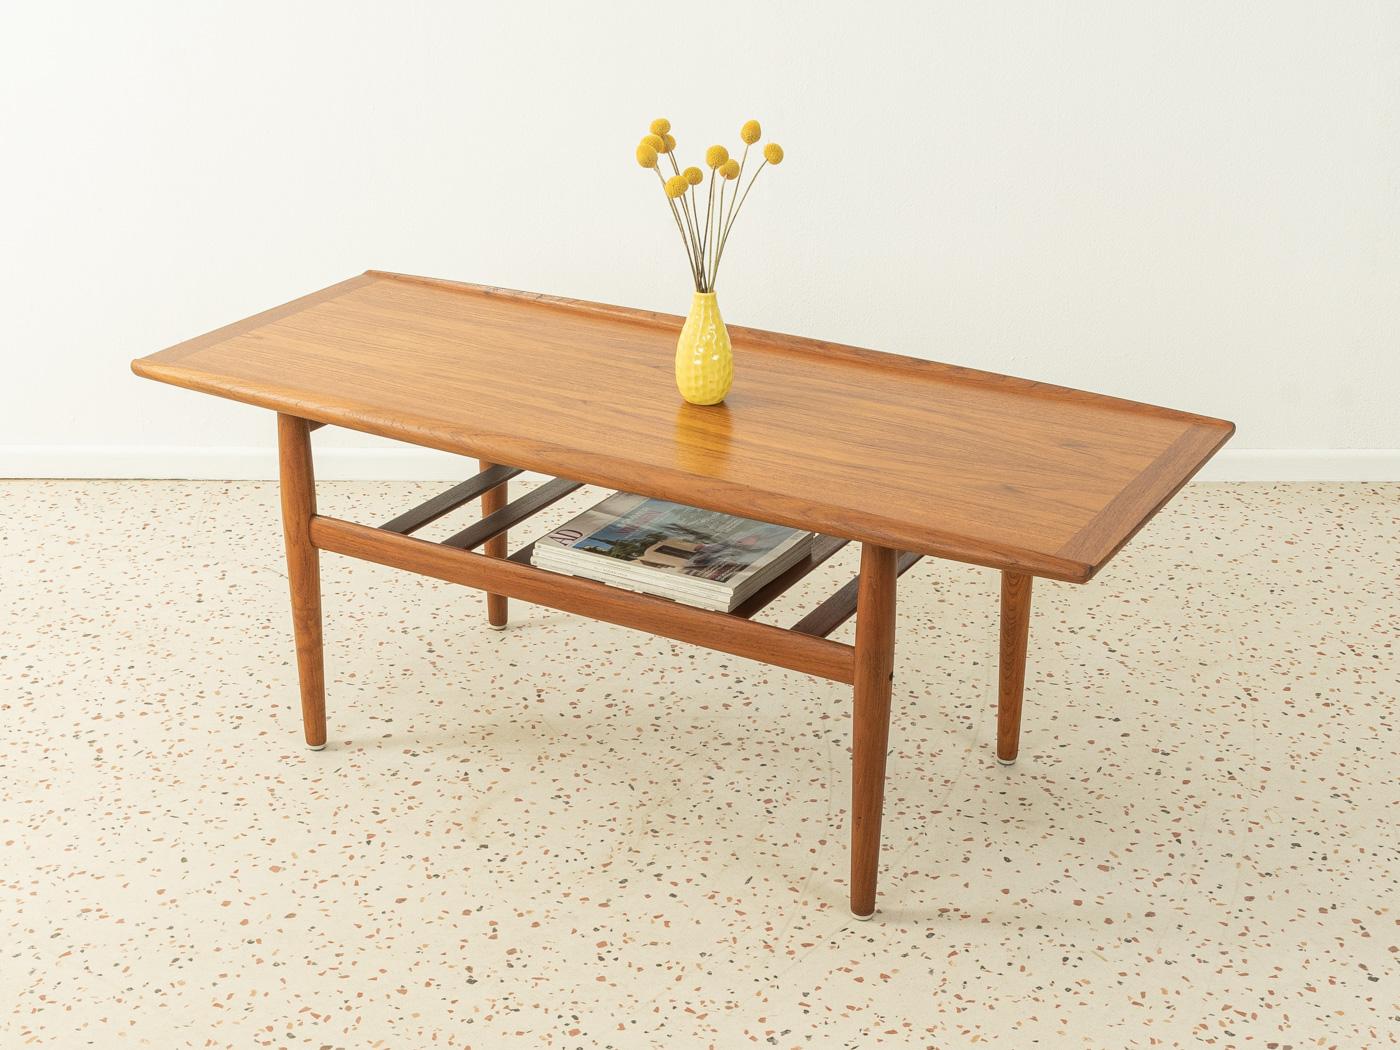 Classic 1960s coffee table by Grete Jalk for Glostrup. Solid frame in teak and a table top in teak veneer with solid wood edge. Made in Denmark.

Quality Features:
- Accomplished design: perfect proportions and visible attention to detail
-